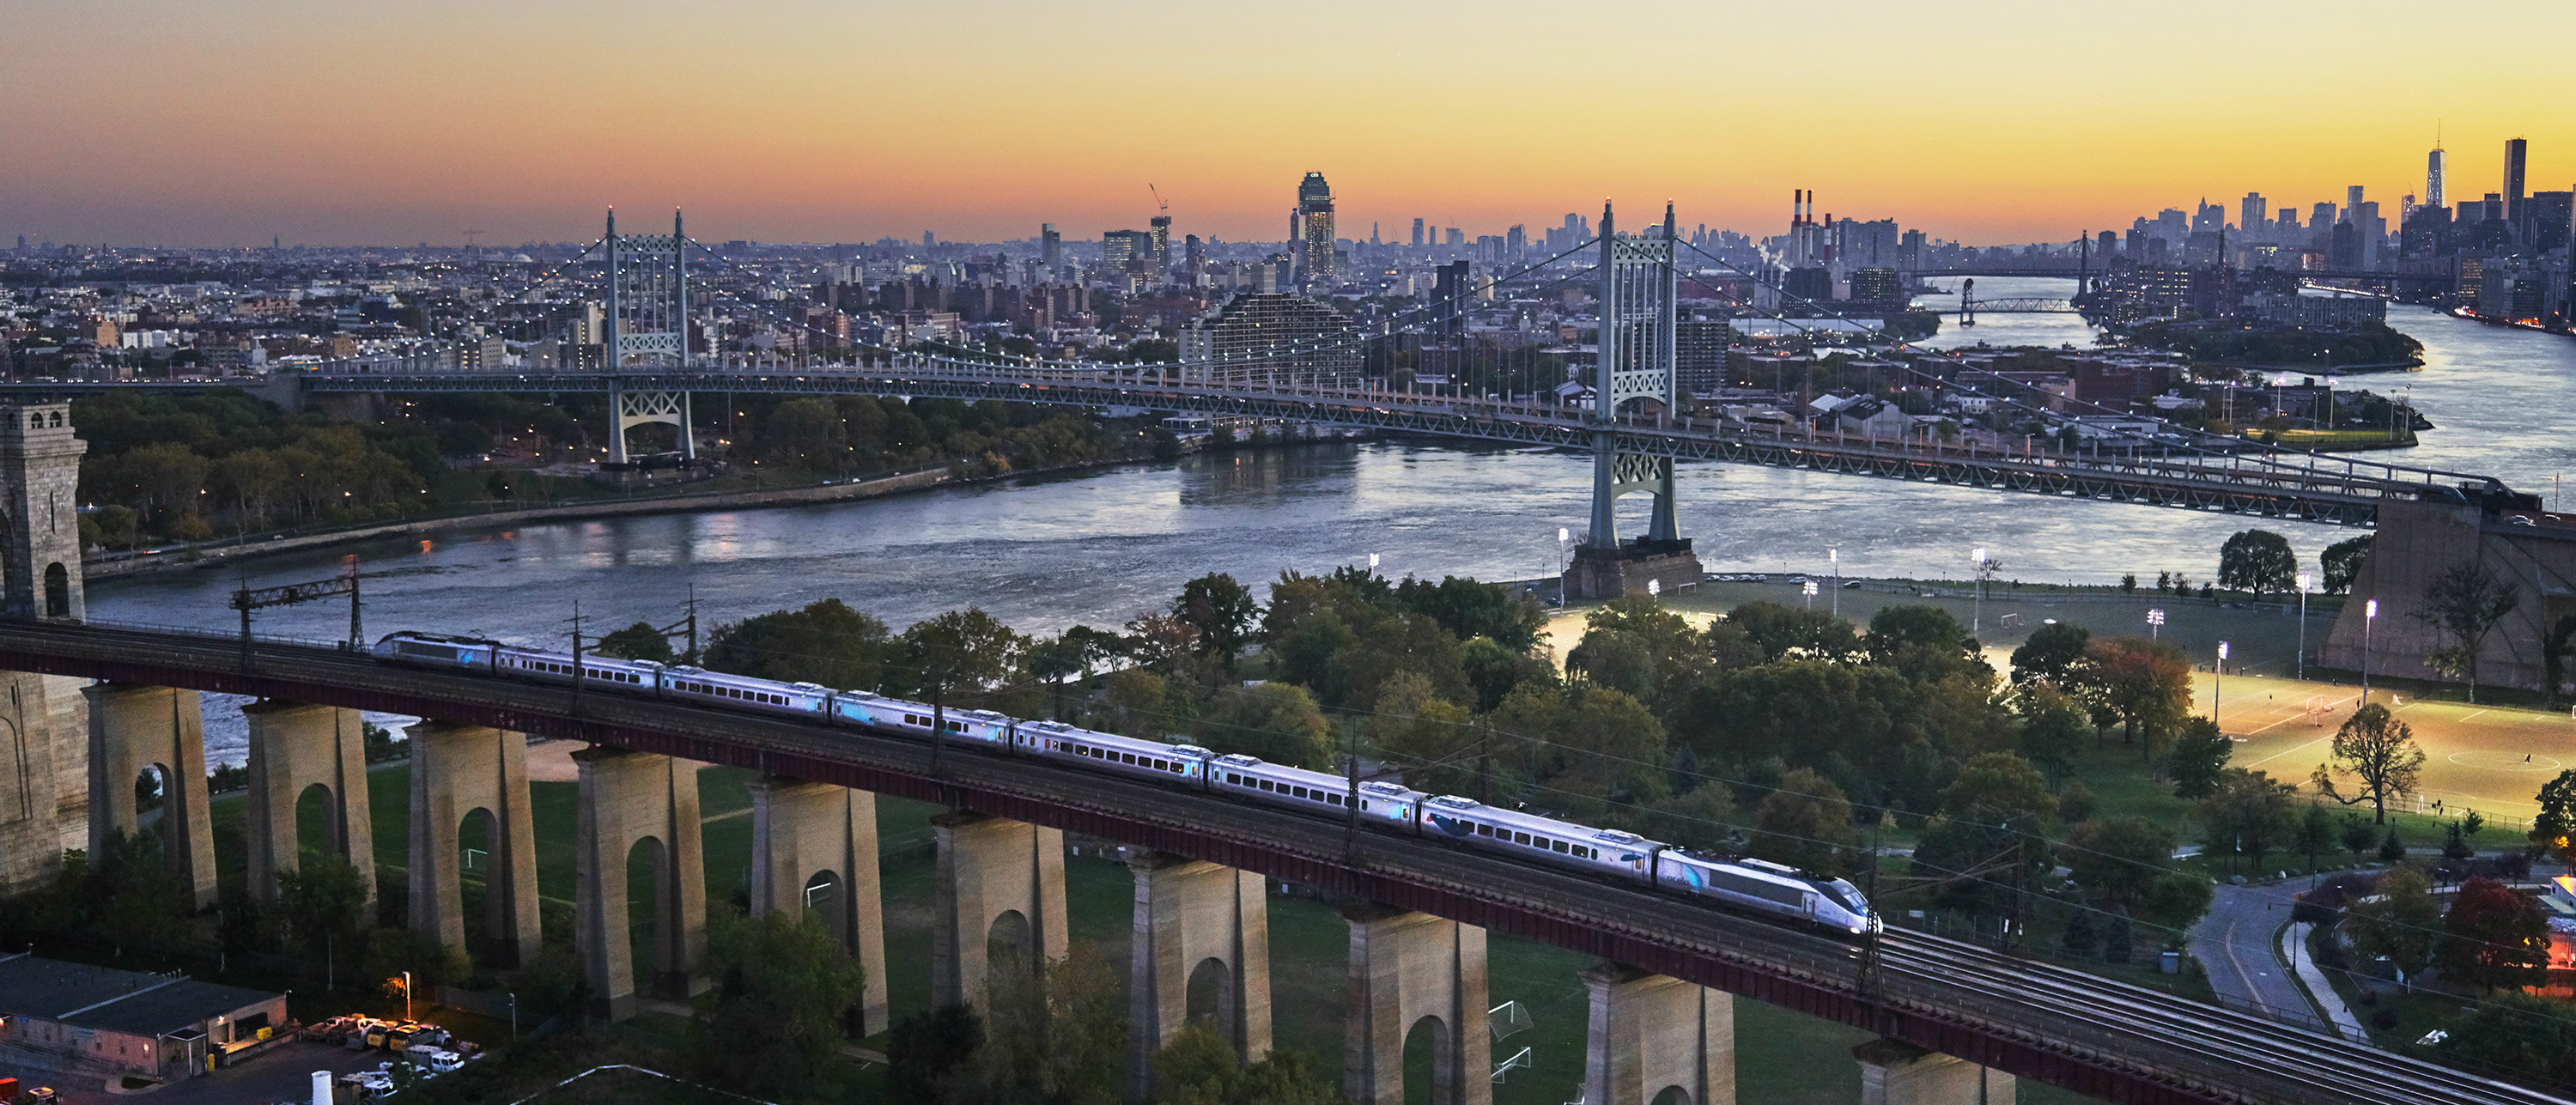 Amtrak’s President & CEO Reflects on Acela 15th Anniversary